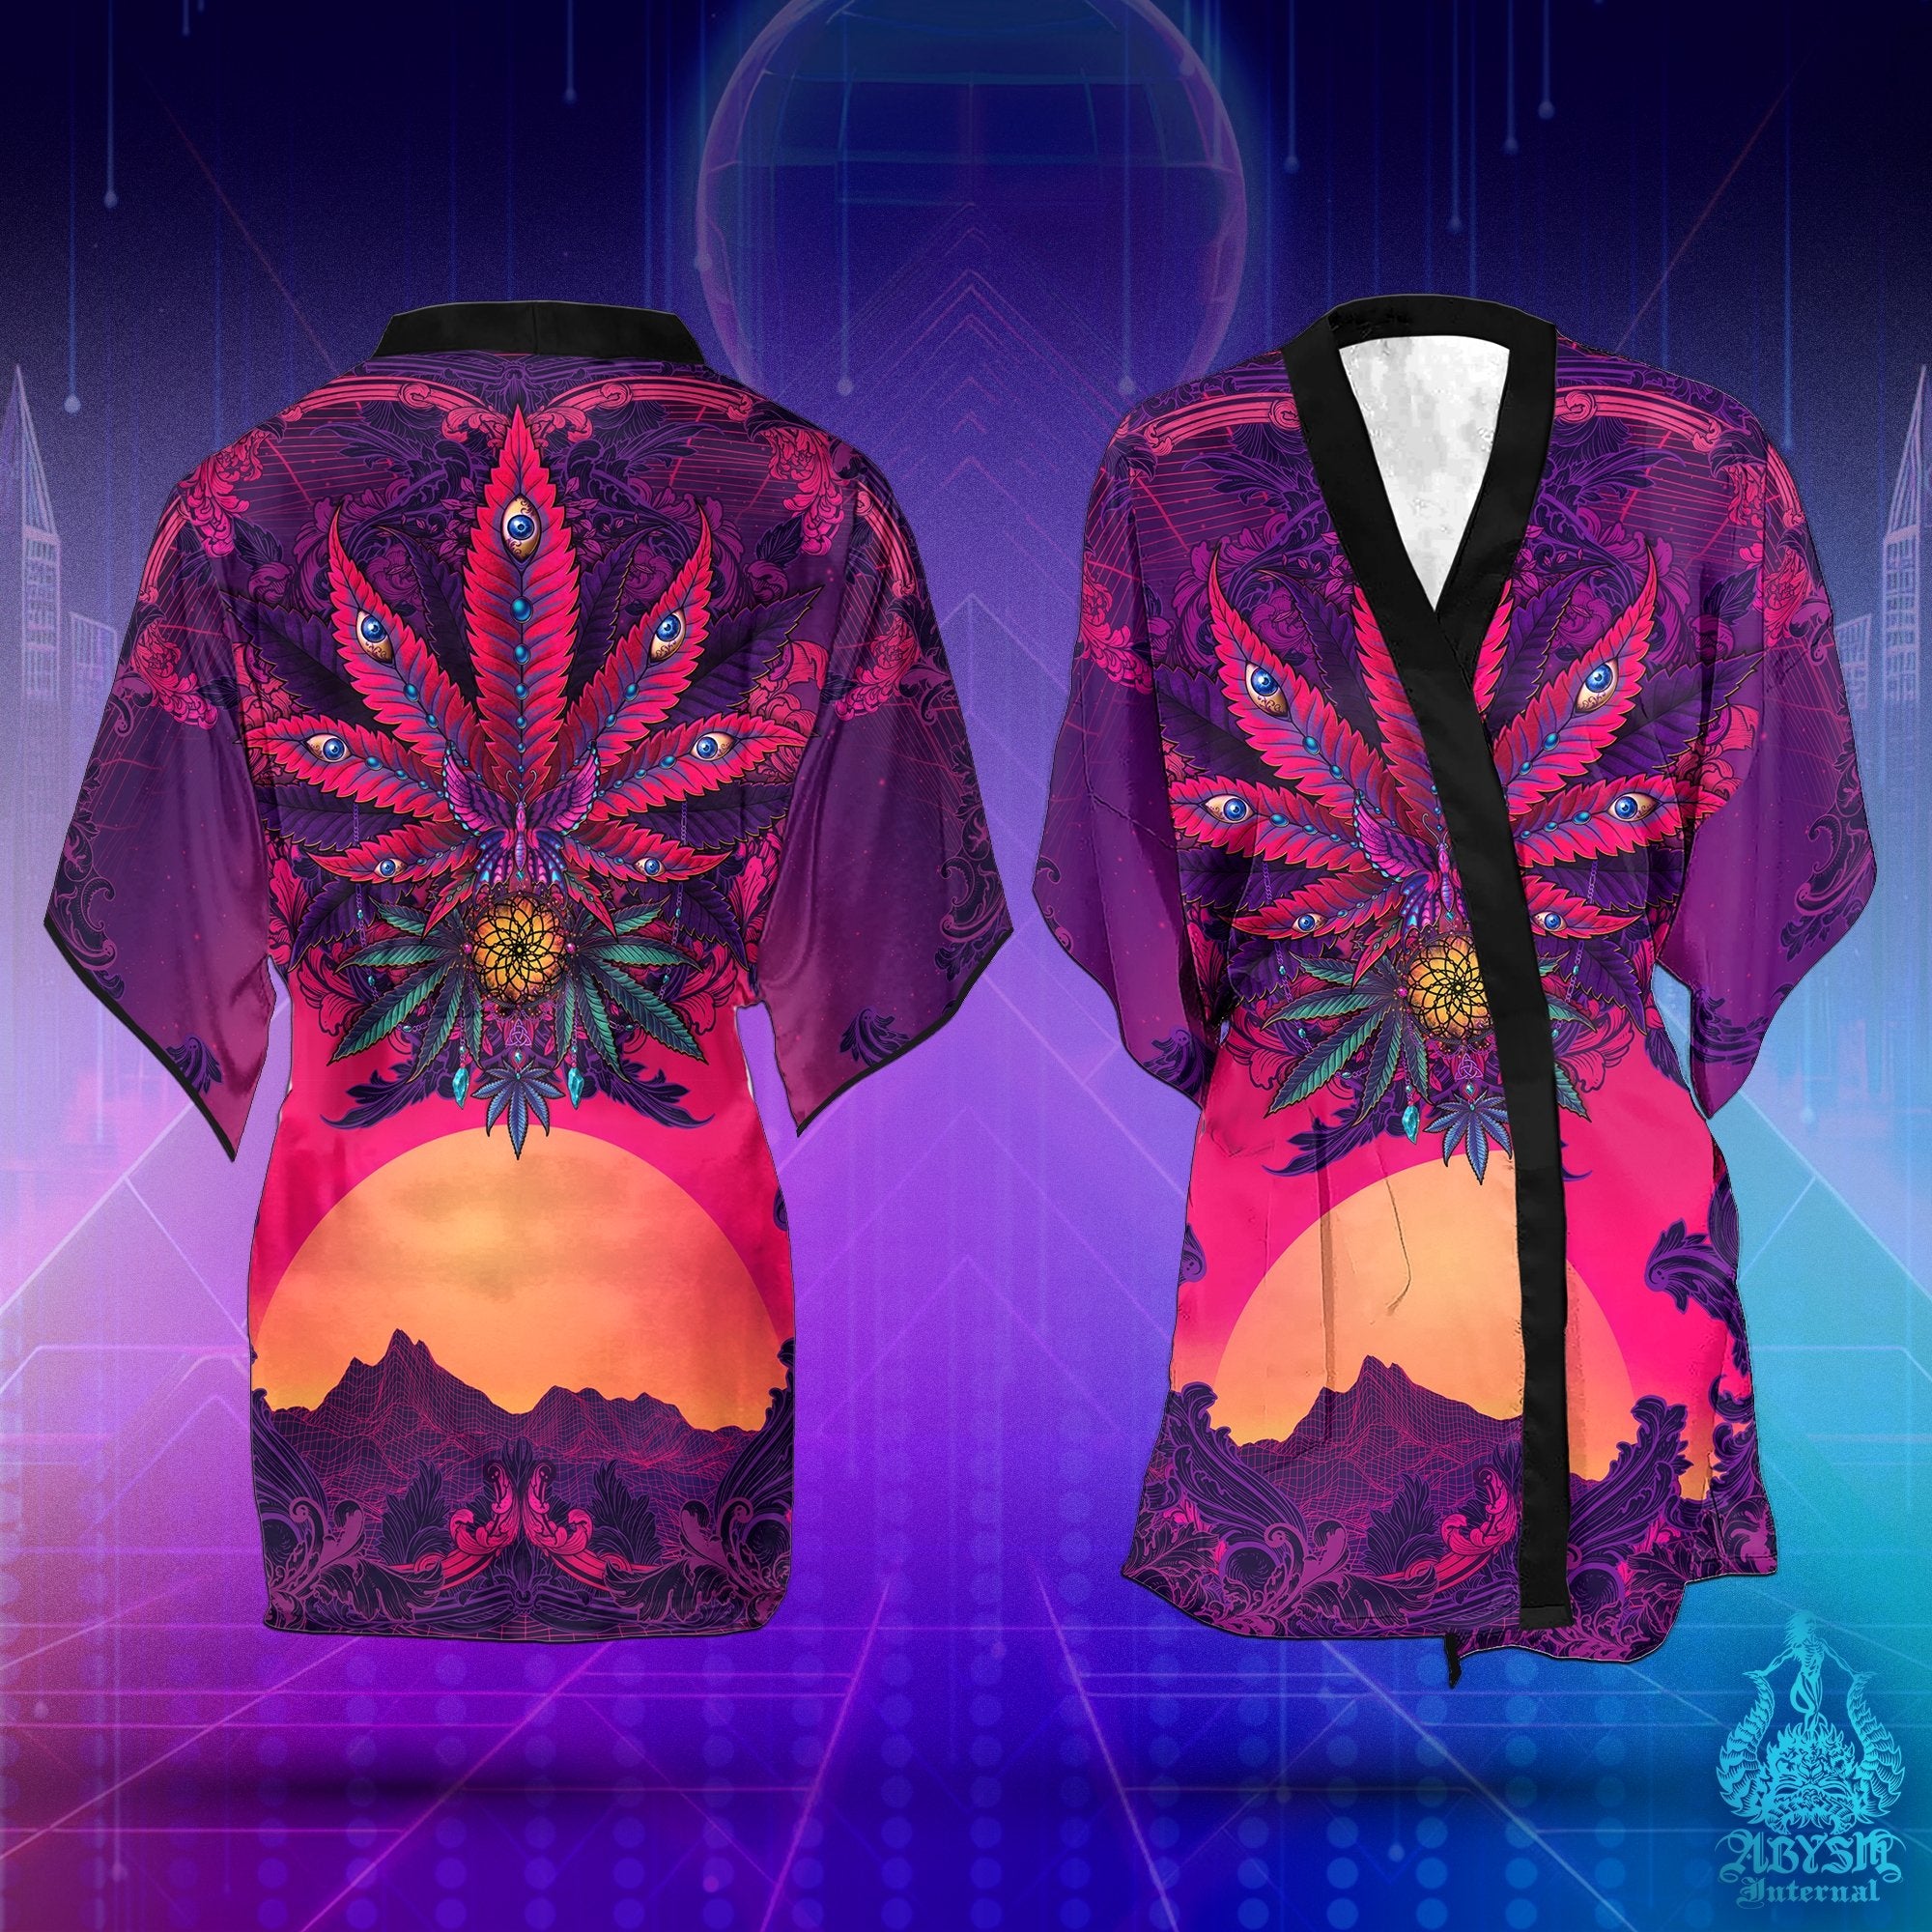 Psychedelic Weed Cover Up, Synthwave Cannabis Outfit, Retrowave Party Kimono, Vaporwave Summer Festival Robe, 80s Art, 420 Gift, Alternative Clothing, Unisex - Marijuana - Abysm Internal